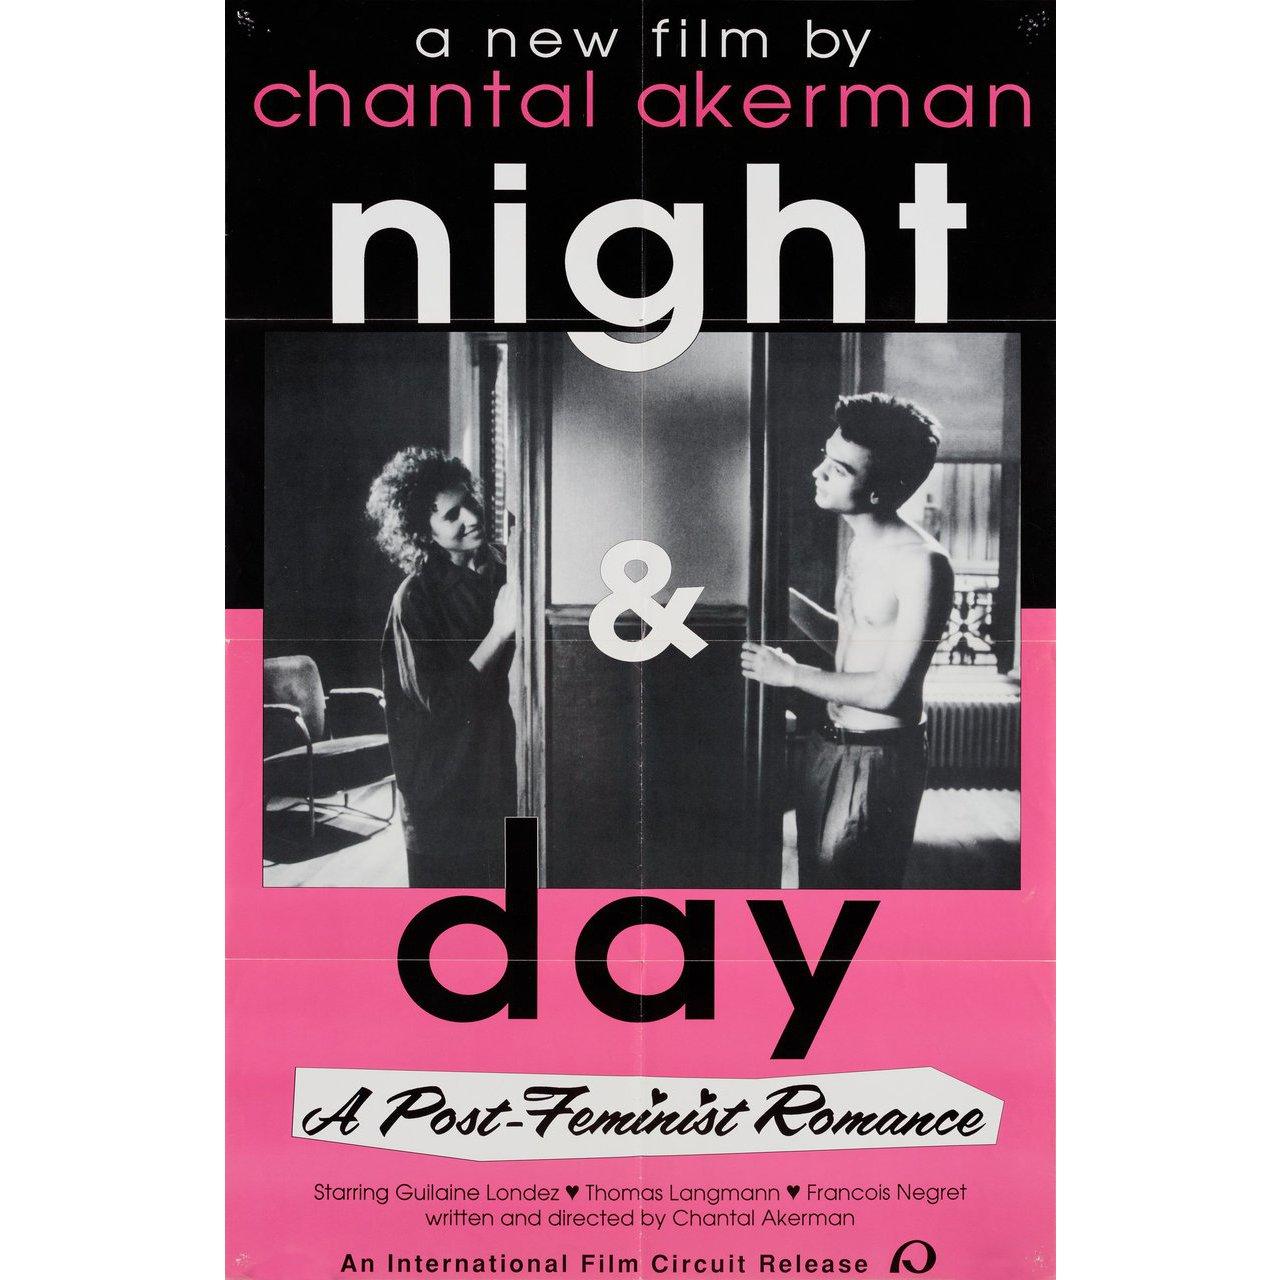 Original 1991 U.S. poster for the film Night and Day (Nuit et Jour) directed by Chantal Akerman with Guilaine Londez / Thomas Langmann / Francois Negret. Very Good condition, folded with pinholes. Many original posters were issued folded or were